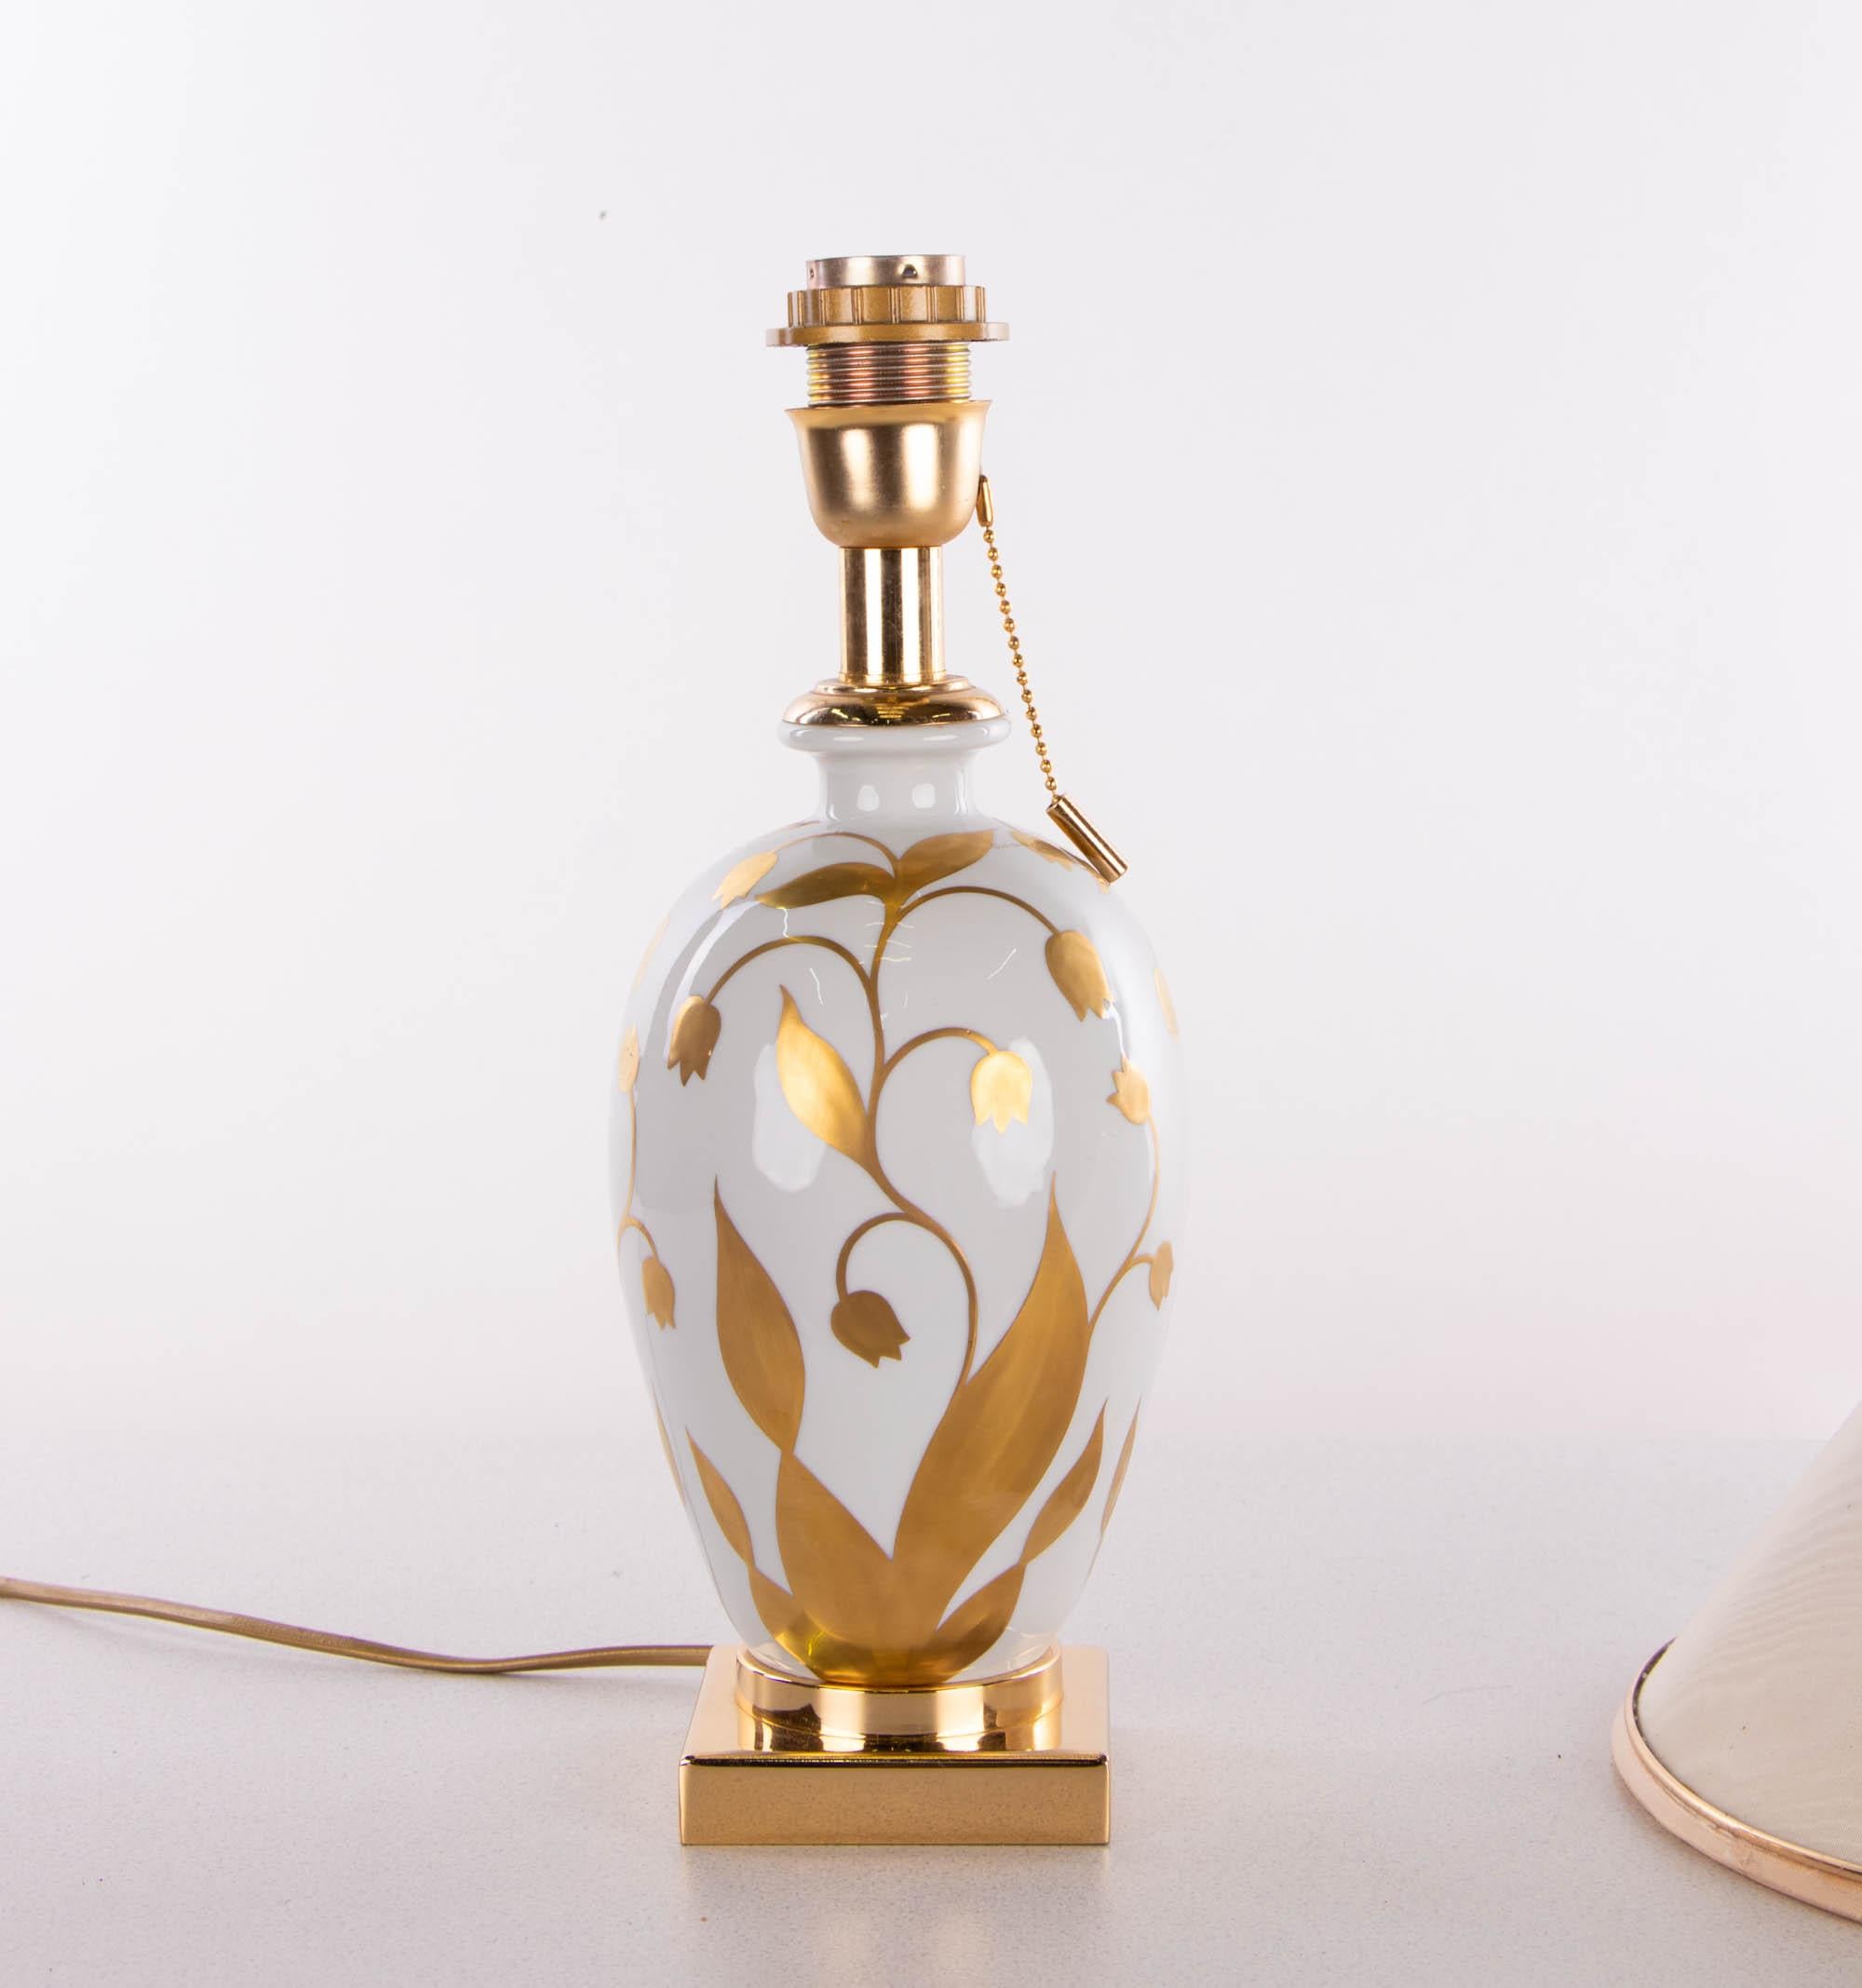 Hand-Painted Giulia Mangani Porcelain Table Lamp - Lilium Collection, Italy, Florence